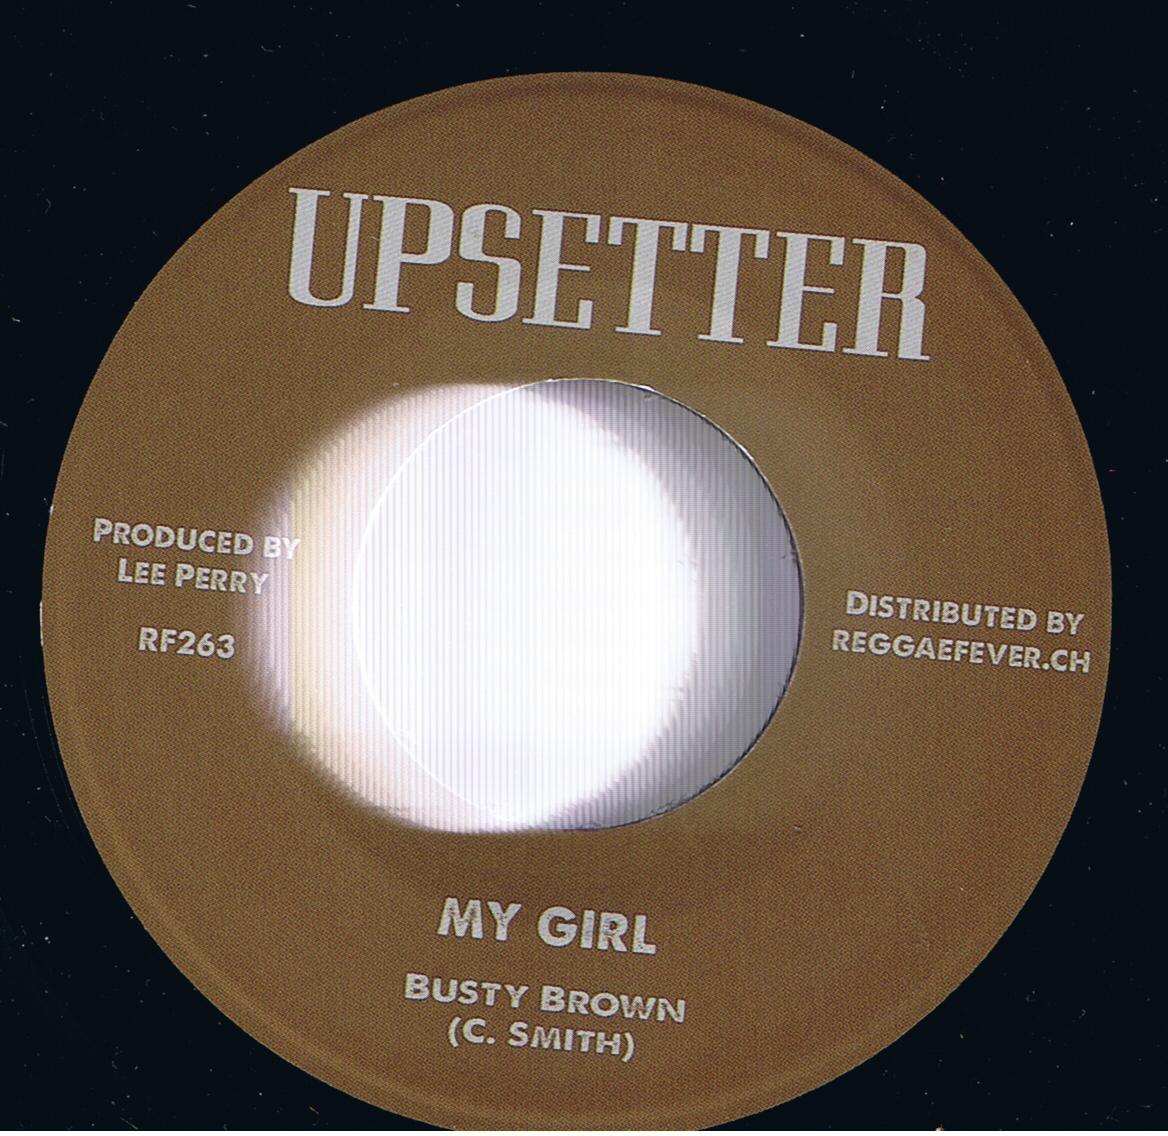 Busty Brown - My Girl / The Upsetters - My Girl (7")